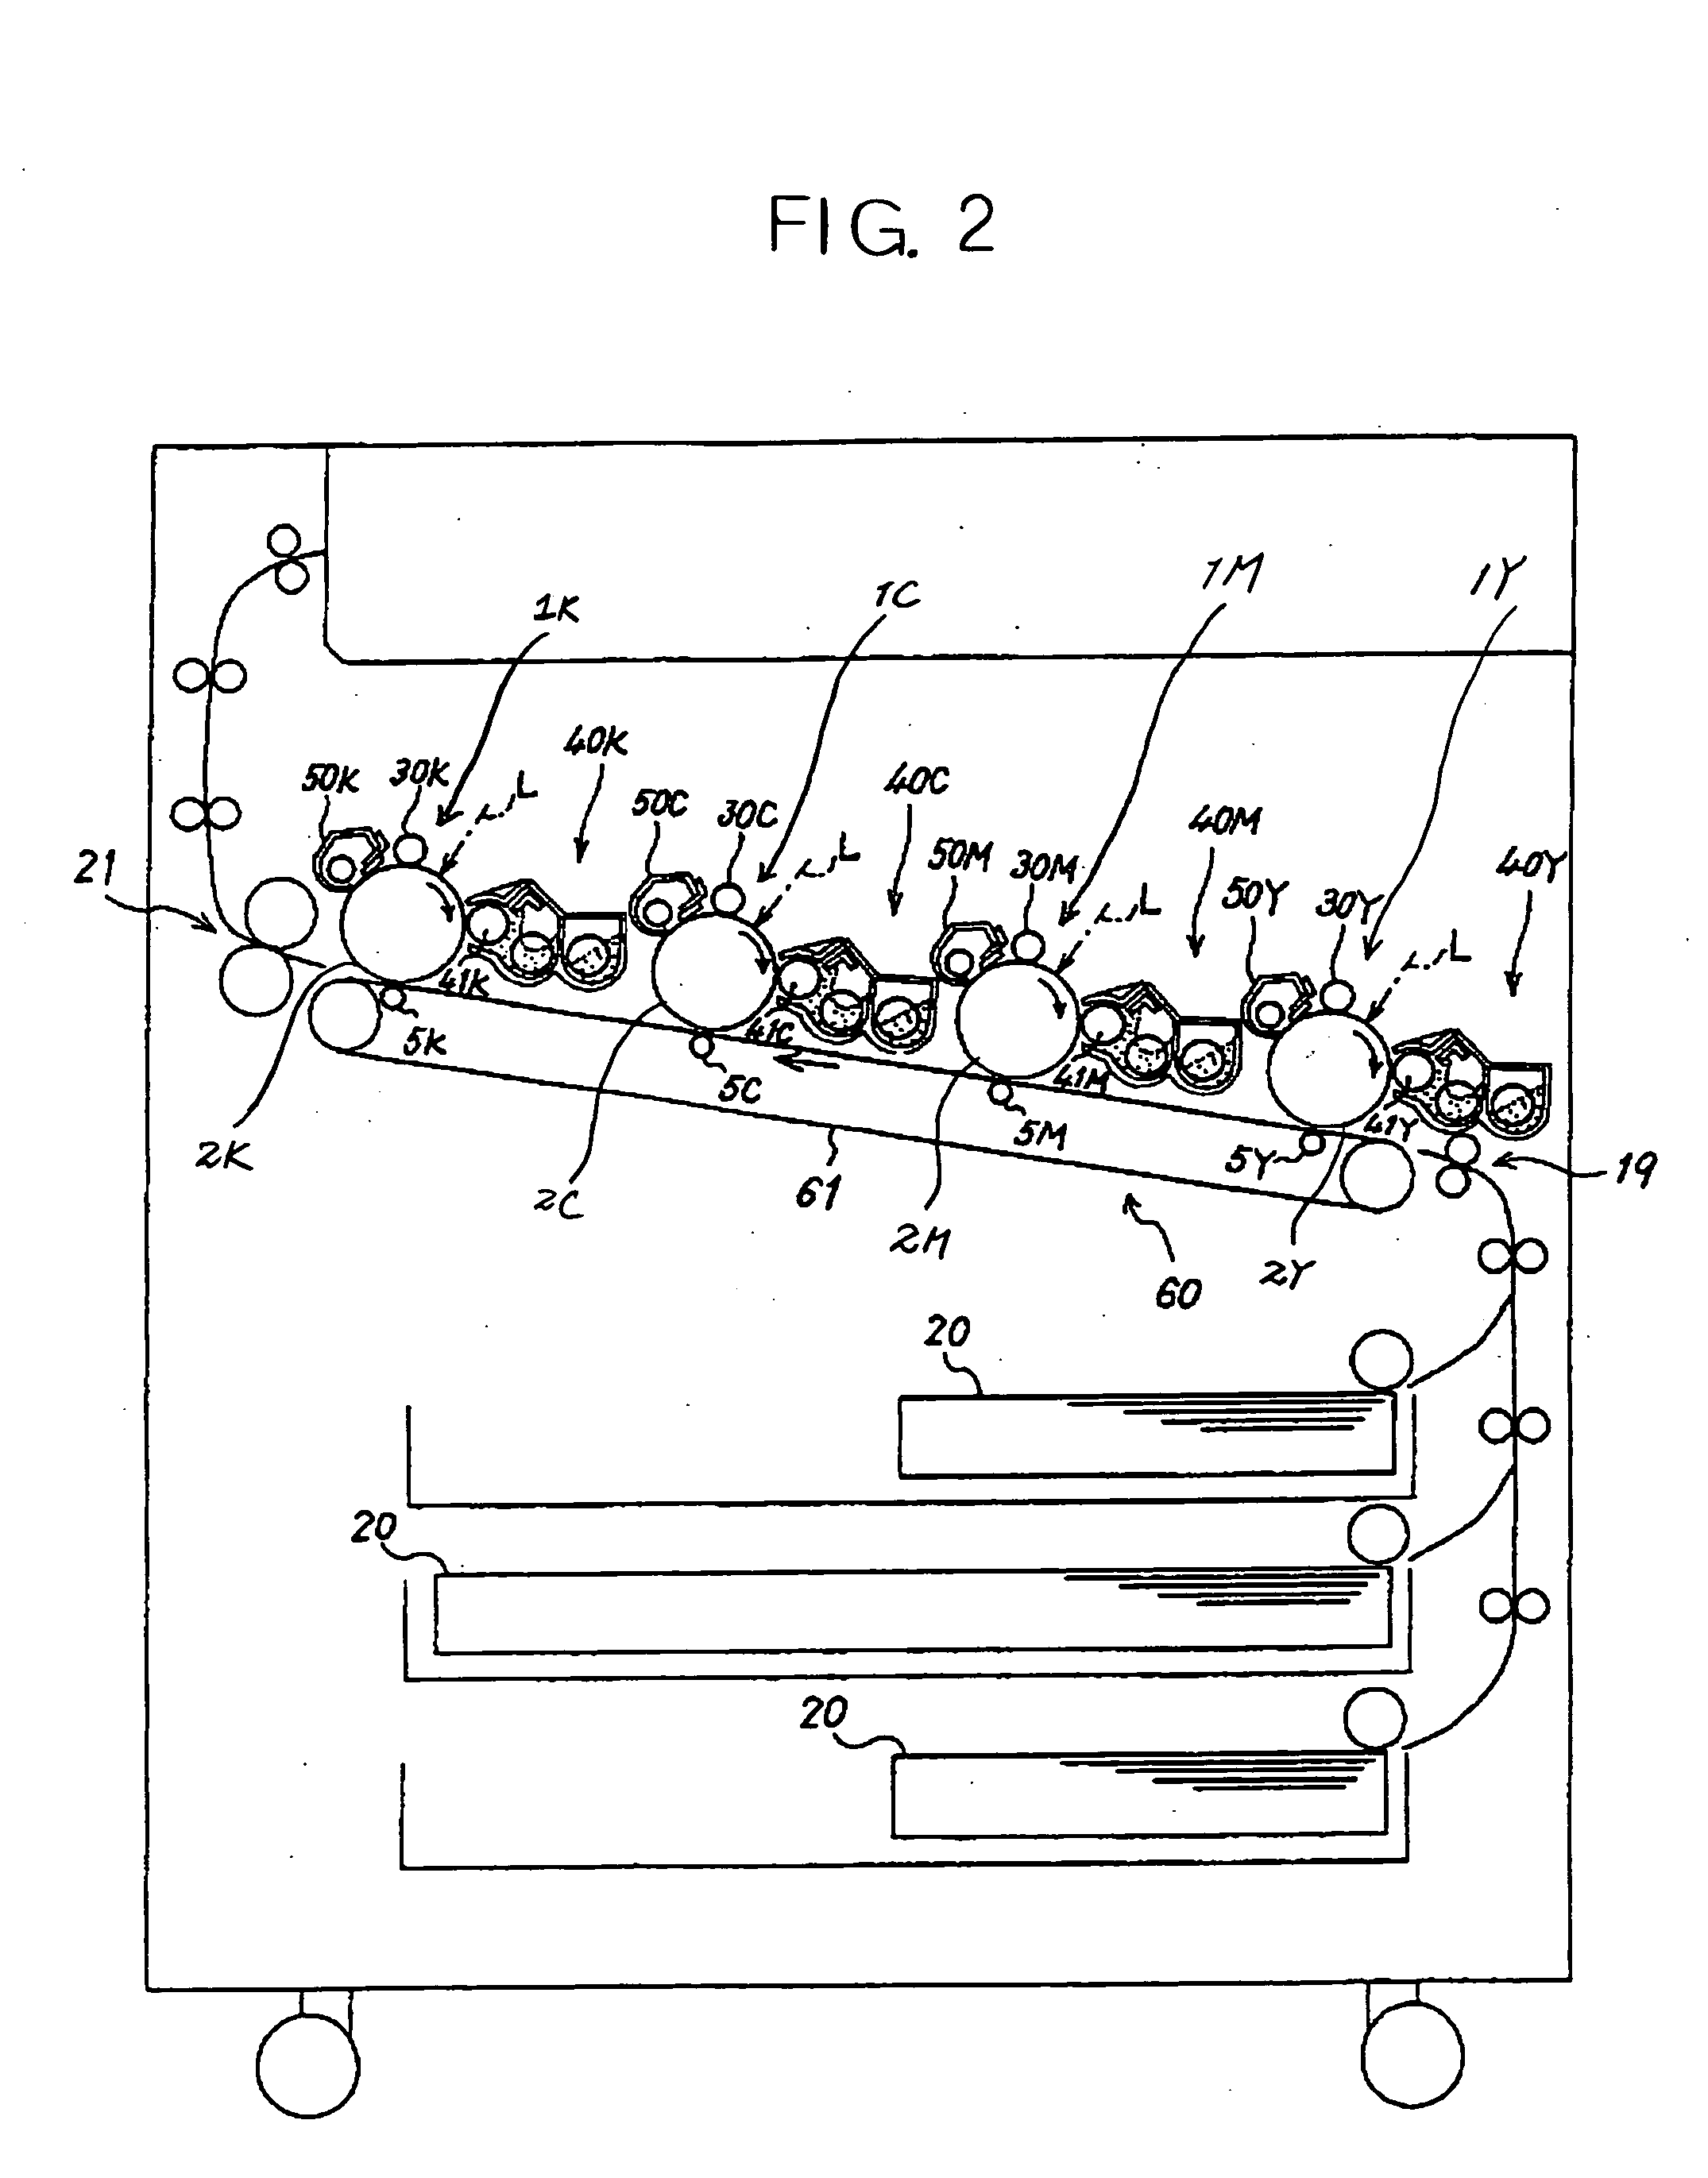 Developing device and process cartridge for an image forming apparatus